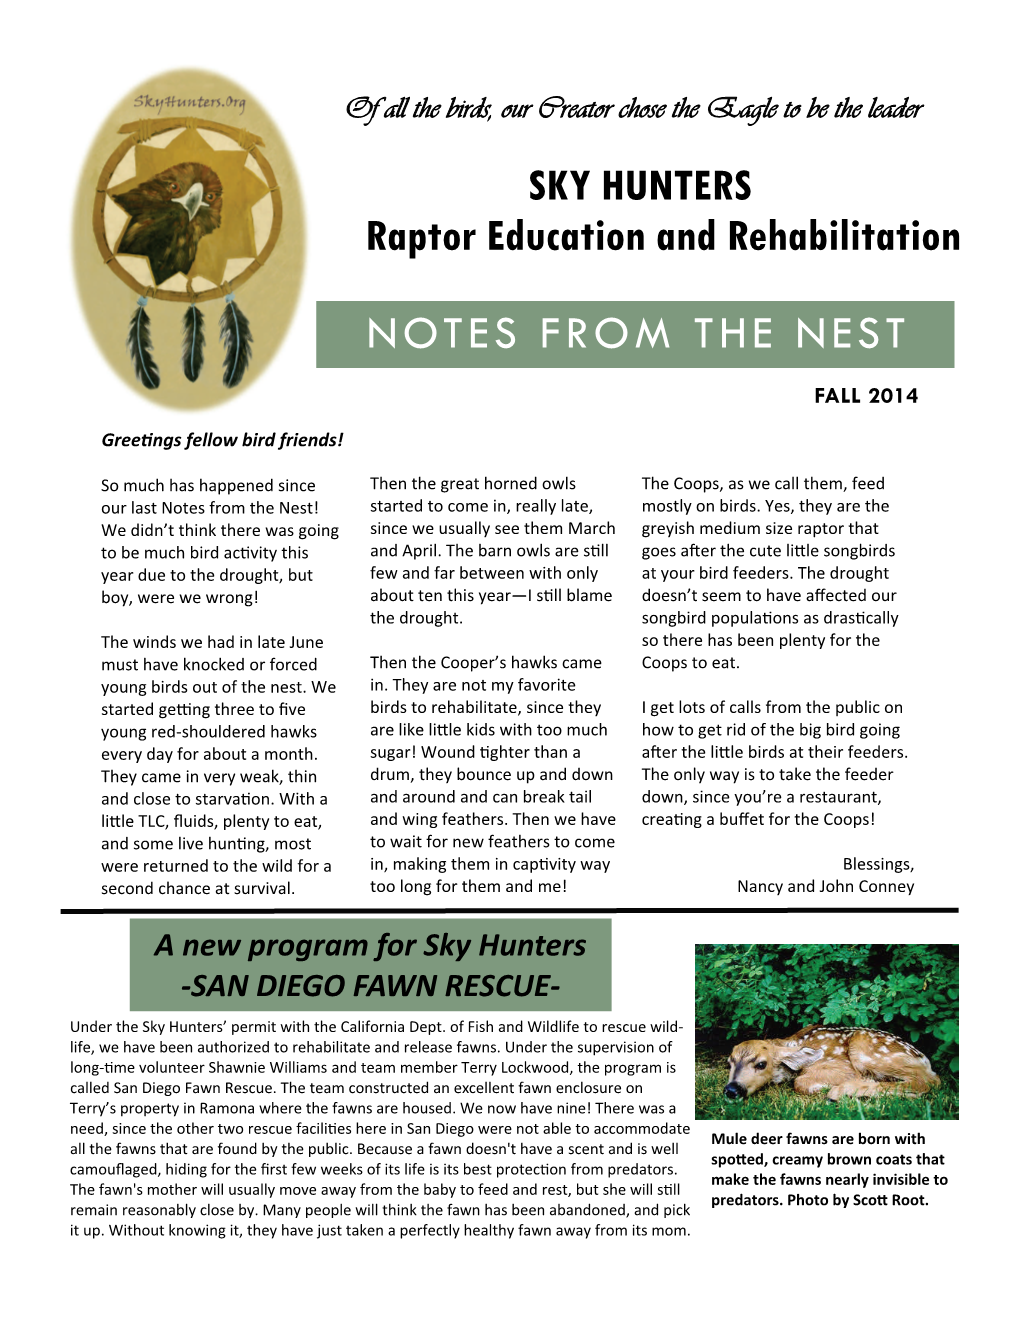 NOTES from the NEST SKY HUNTERS Raptor Education and Rehabilitation